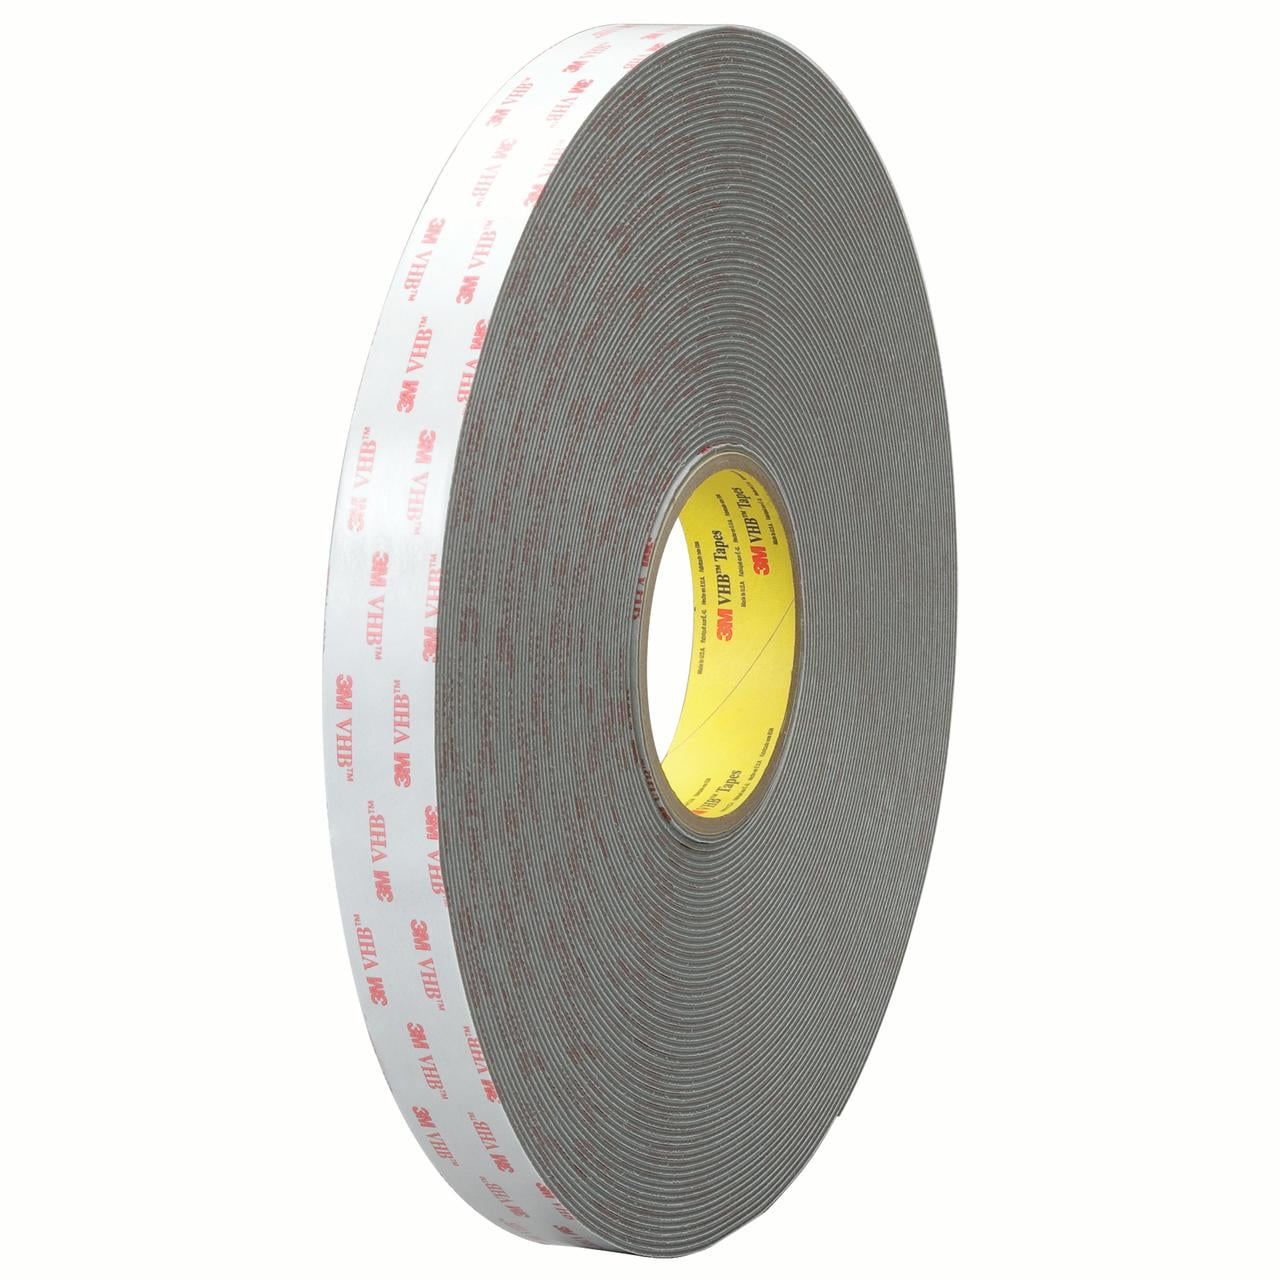 495901r 1 In. X 5 Yards White 3m 4959 Tape